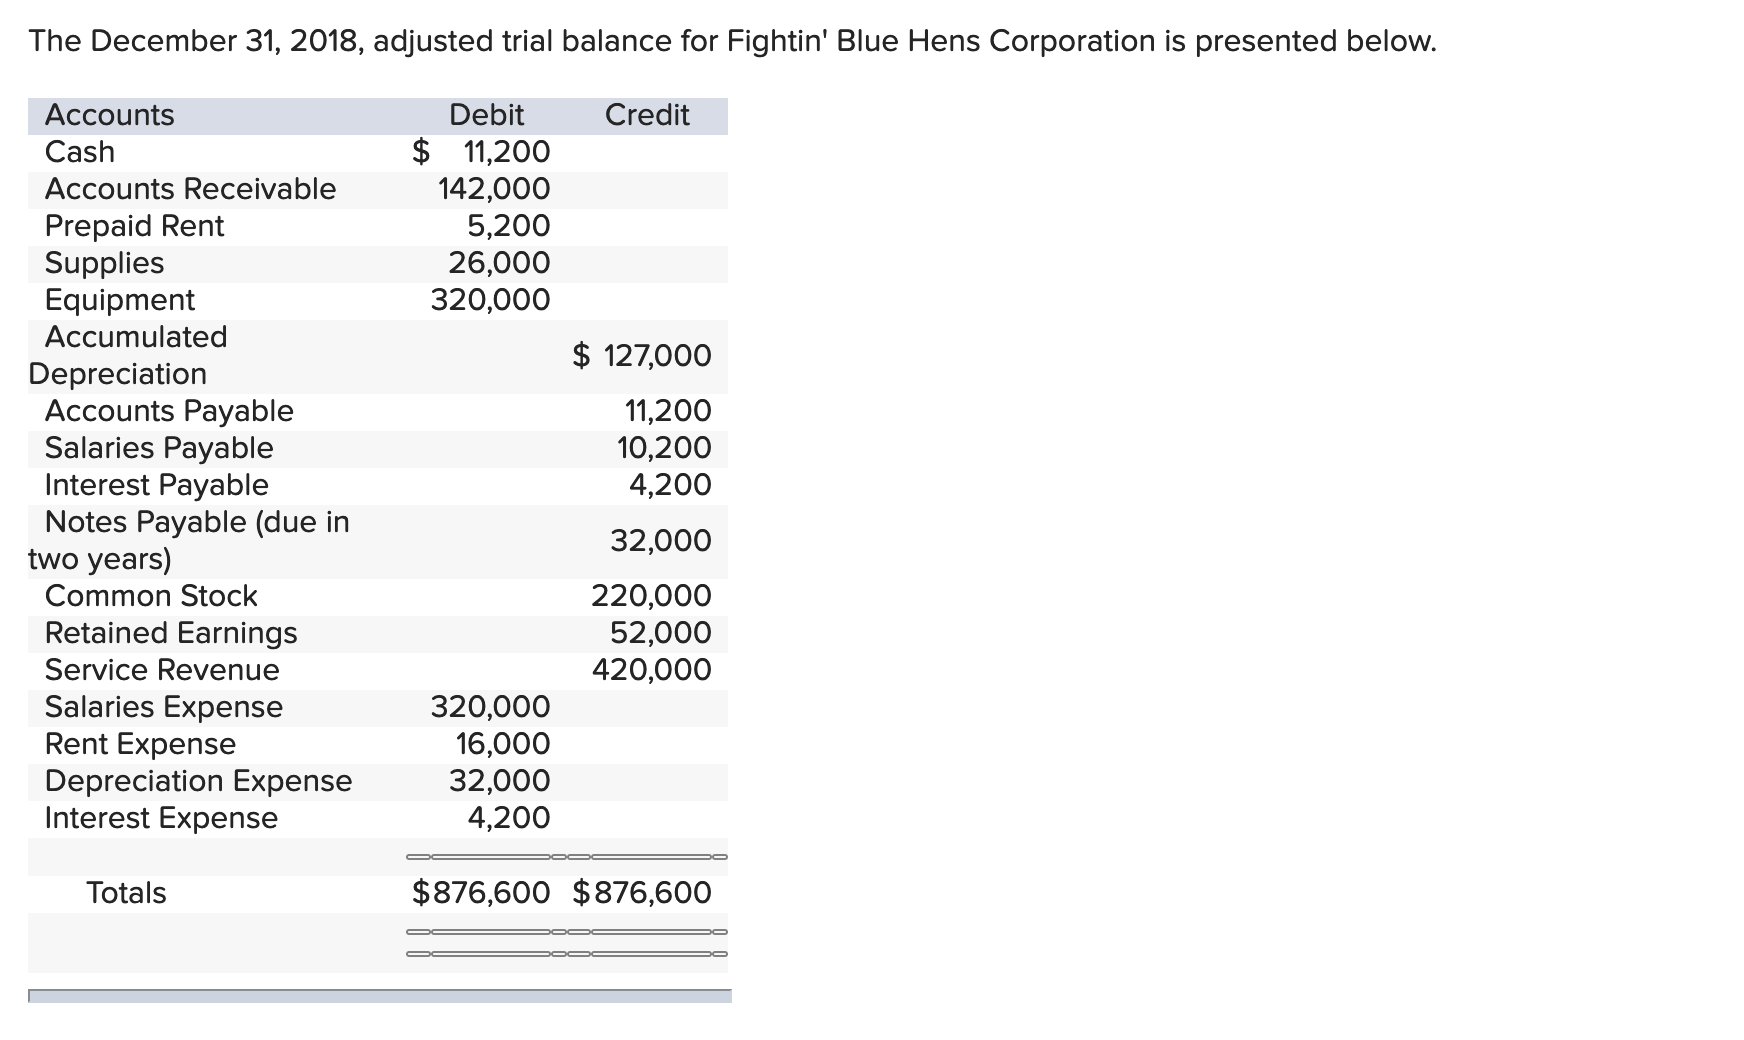 The December 31, 2018, adjusted trial balance for Fightin' Blue Hens Corporation is presented below.
Accounts
Debit
Credit
$ 11,200
142,000
5,200
26,000
320,000
Cash
Accounts Receivable
Prepaid Rent
Supplies
Equipment
Accumulated
$ 127,000
Depreciation
Accounts Payable
Salaries Payable
Interest Payable
Notes Payable (due in
two years)
11,200
10,200
4,200
32,000
Common Stock
220,000
52,000
420,000
Retained Earnings
Service Revenue
Salaries Expense
Rent Expense
Depreciation Expense
Interest Expense
320,000
16,000
32,000
4,200
Totals
$876,600 $876,600
